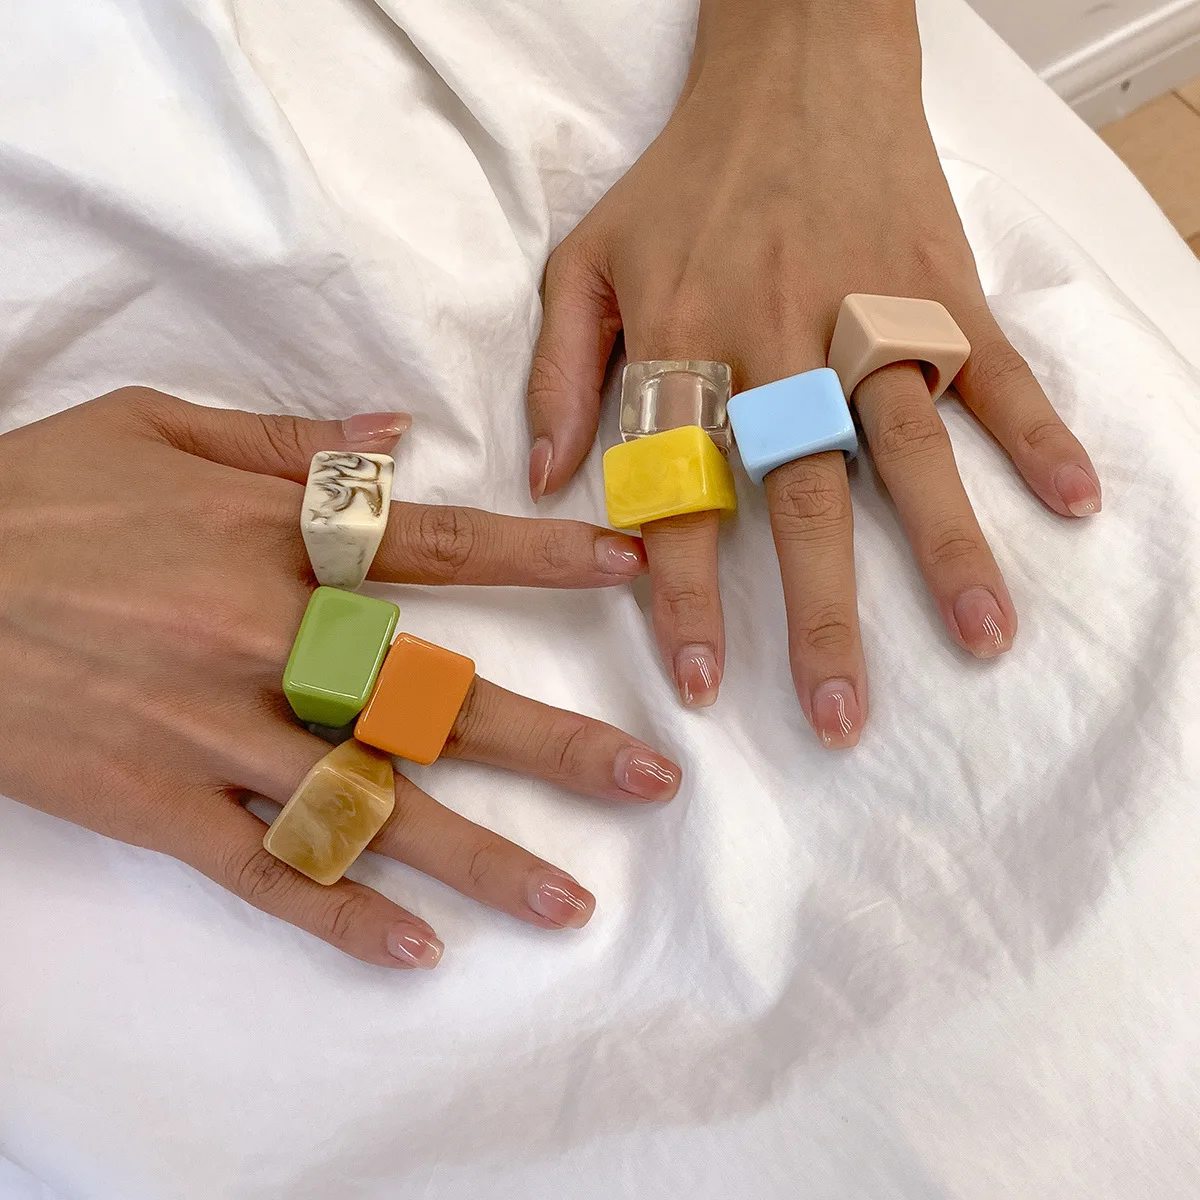 

Simple Thick Square Transparant Acrylic Geometric Irregular Rings for Women Colorful Stackable Resin Finger Ring Jewelry, Picture shows